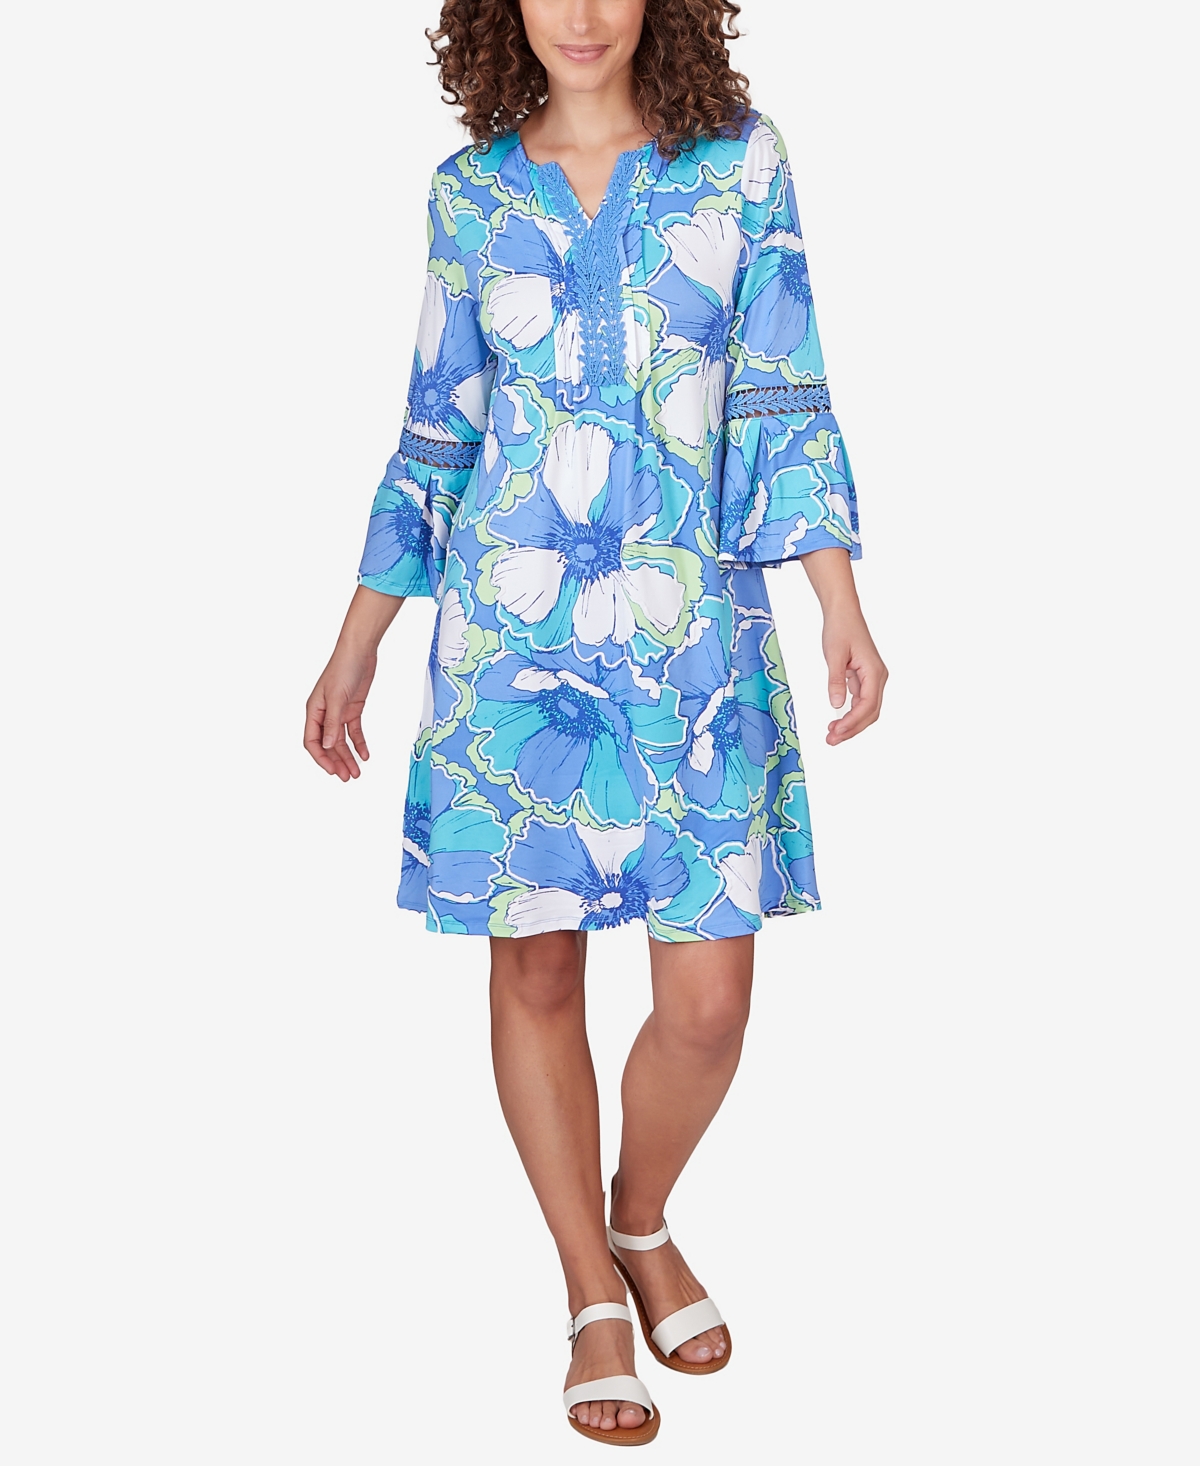 Ruby Rd. Petite Floral Puff Print Dress In Blue Moon Multi